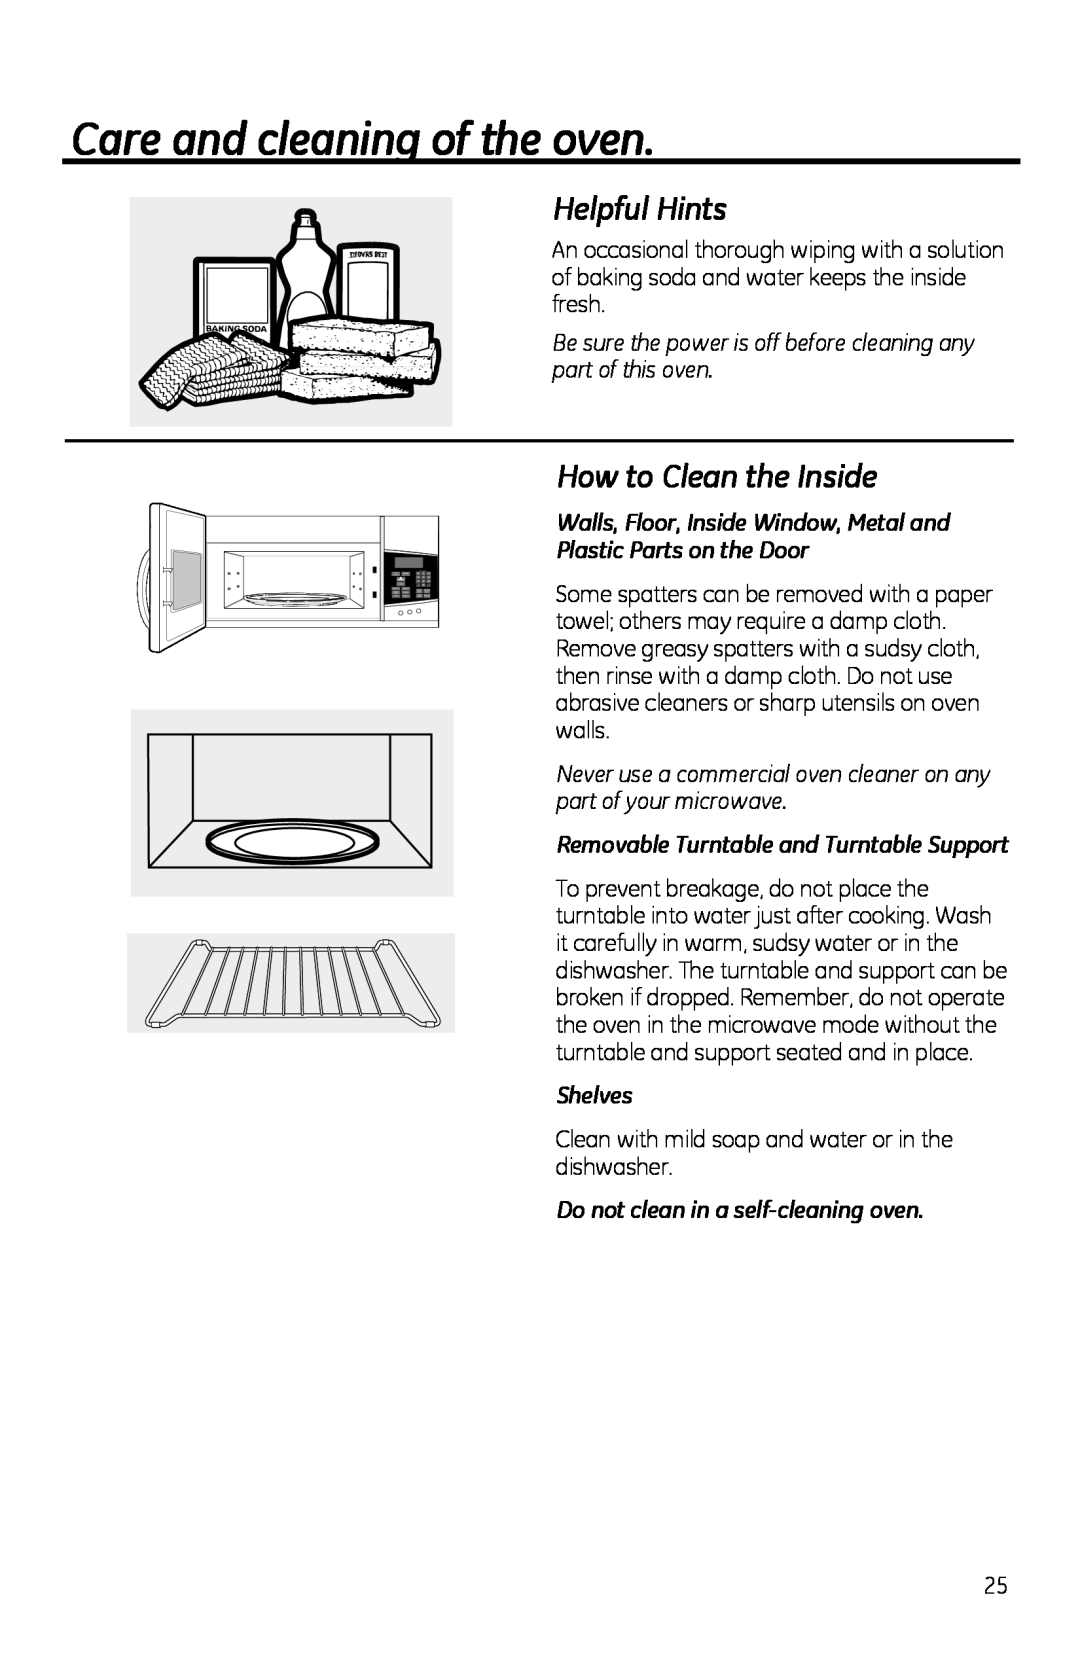 GE PVM1970 owner manual Care and cleaning of the oven, Helpful Hints, How to Clean the Inside, Shelves 